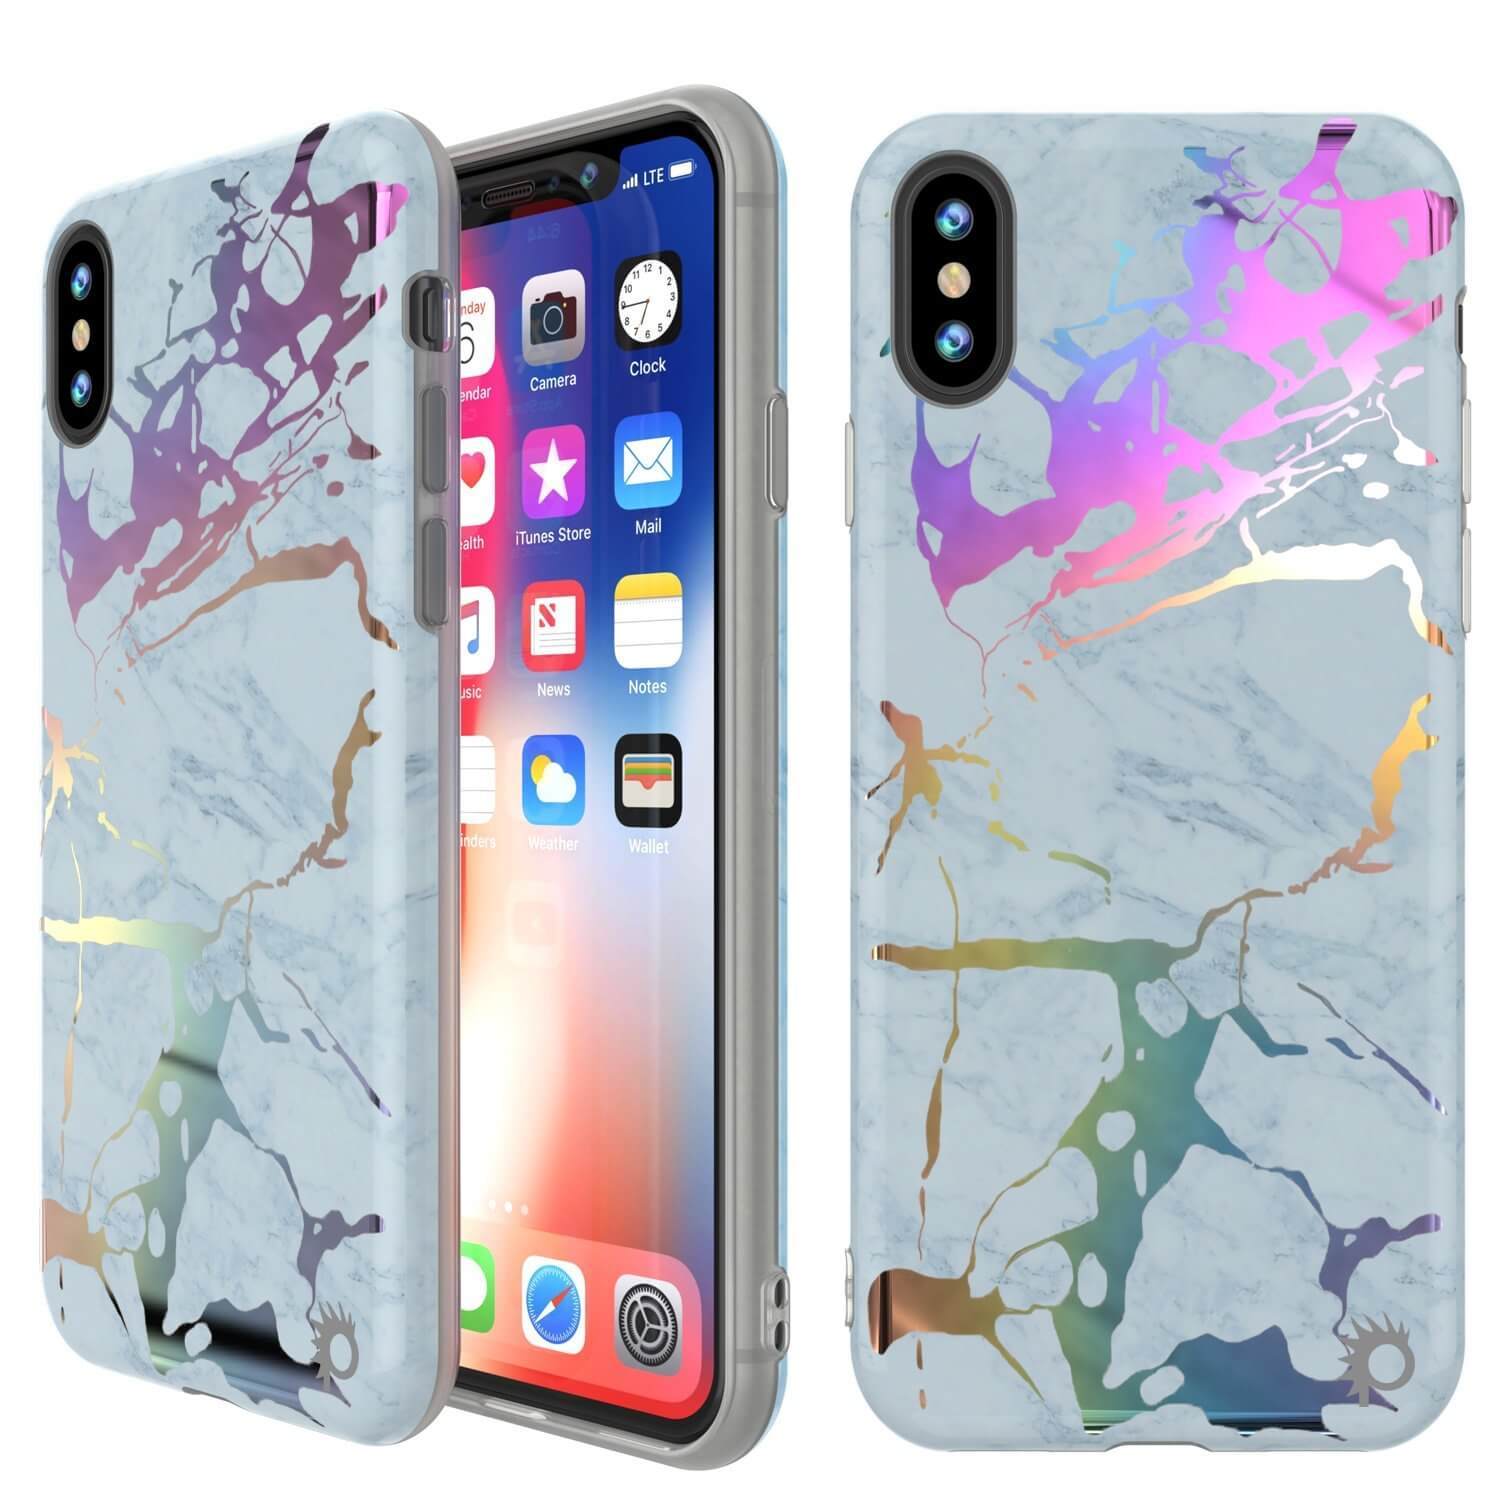 Punkcase iPhone X Marble Case, Protective Full Body Cover W/9H Tempered Glass Screen Protector (Blue Marmo)